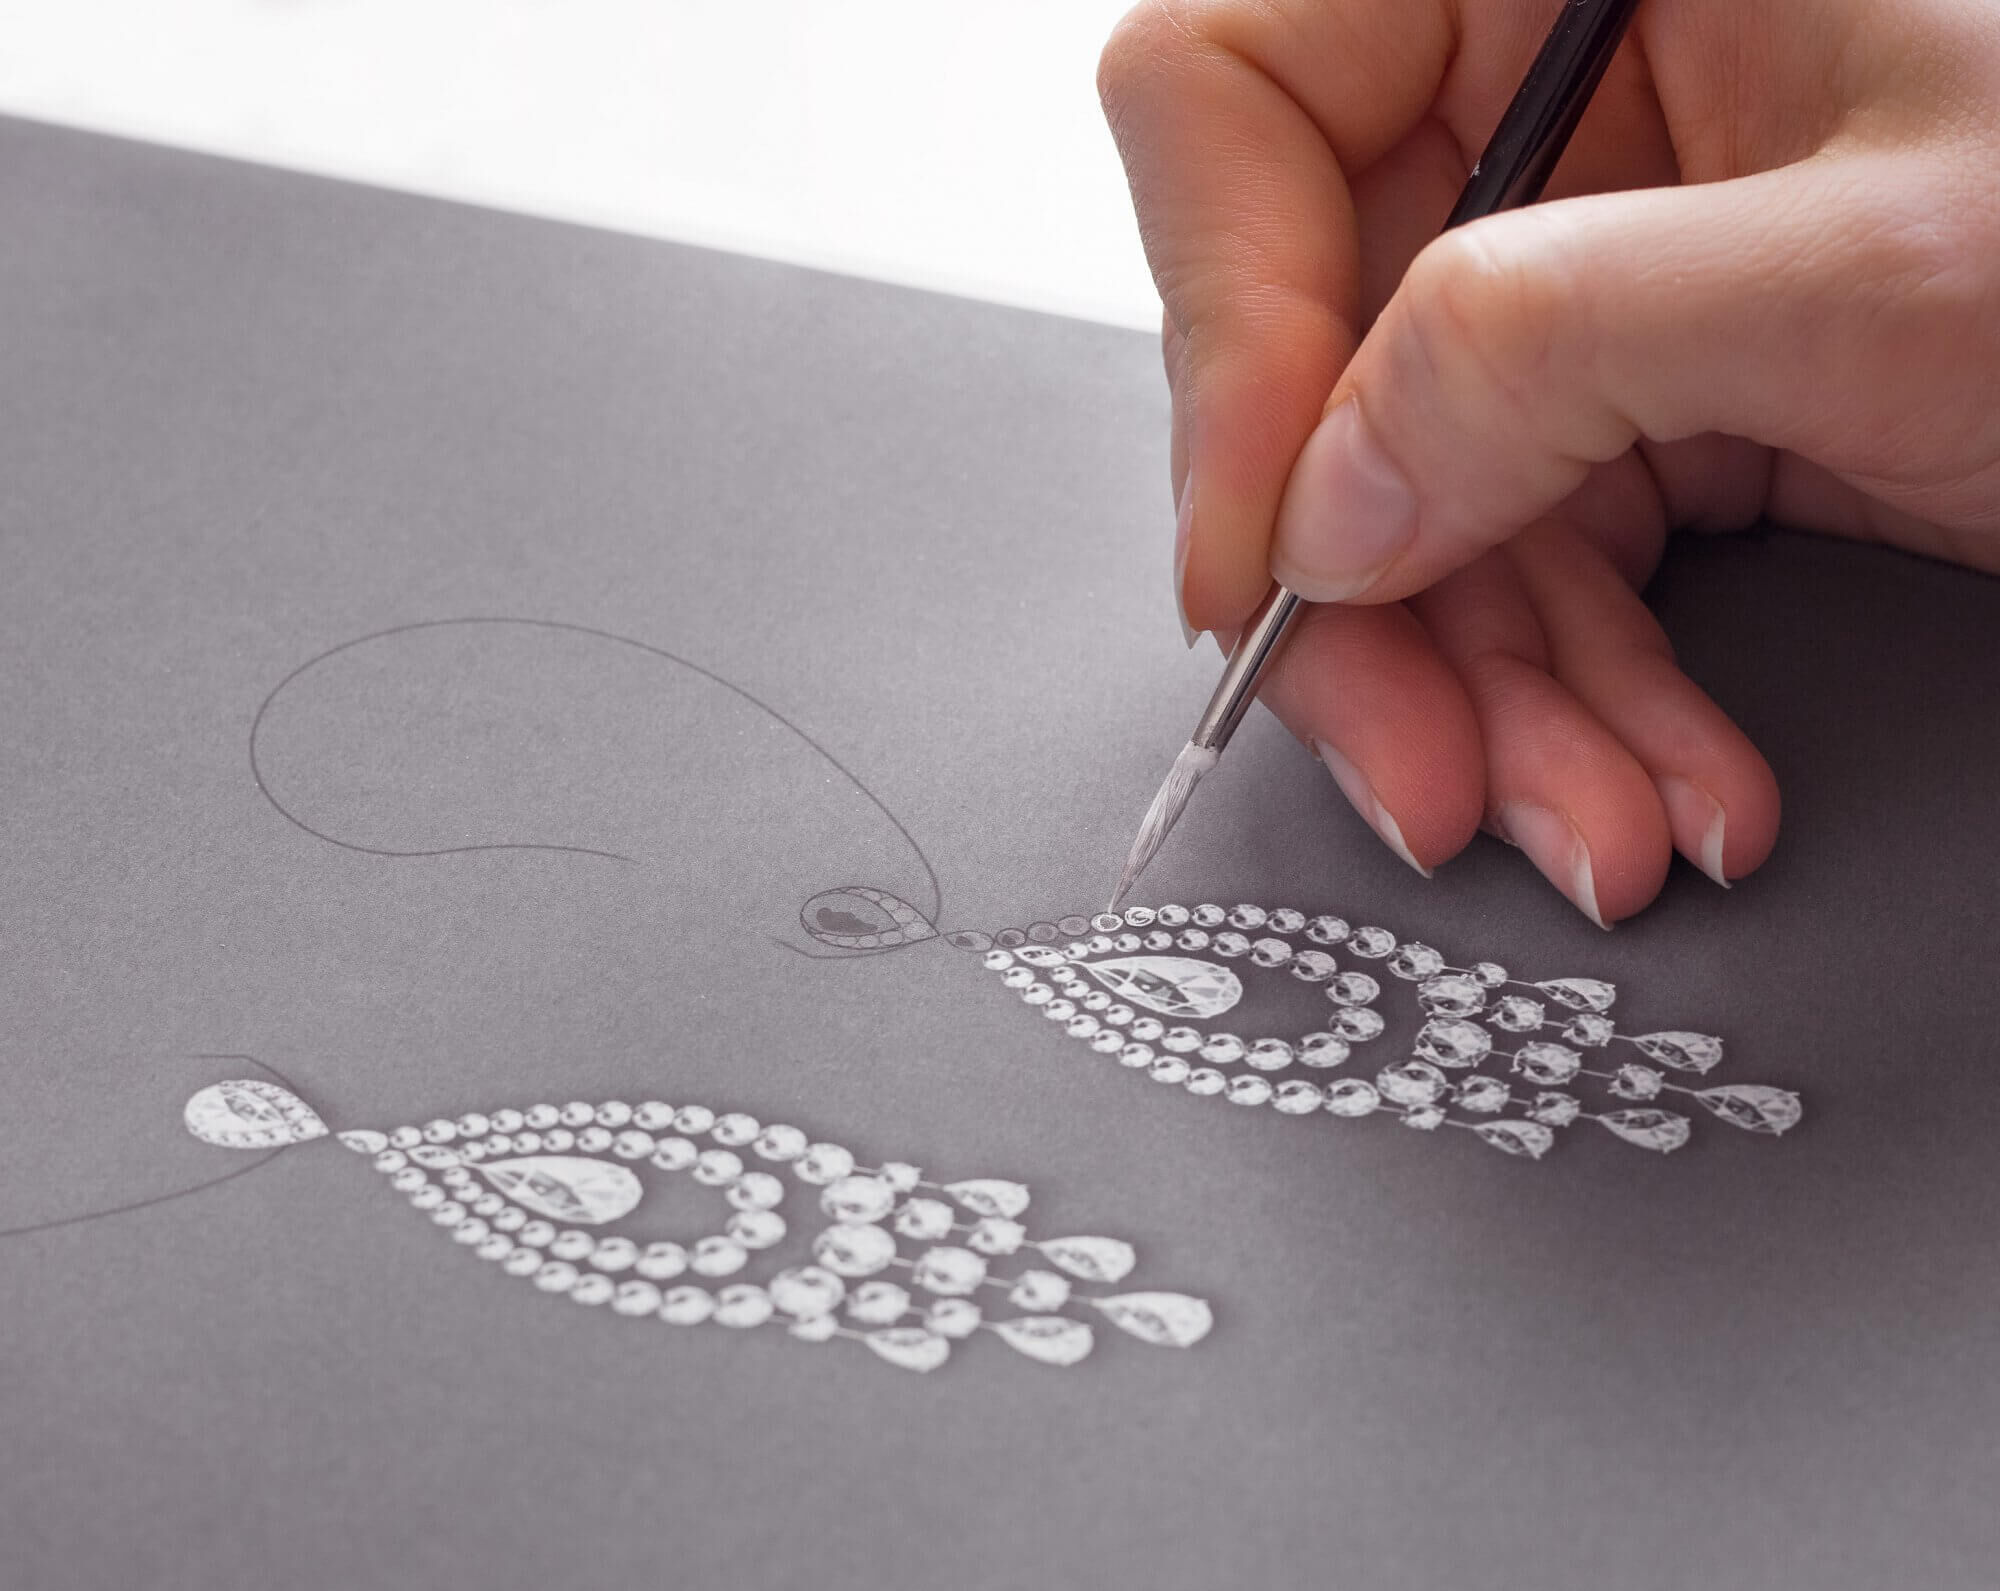 A designer hand paints a detailed two-dimensional representation of how a the earrings might look